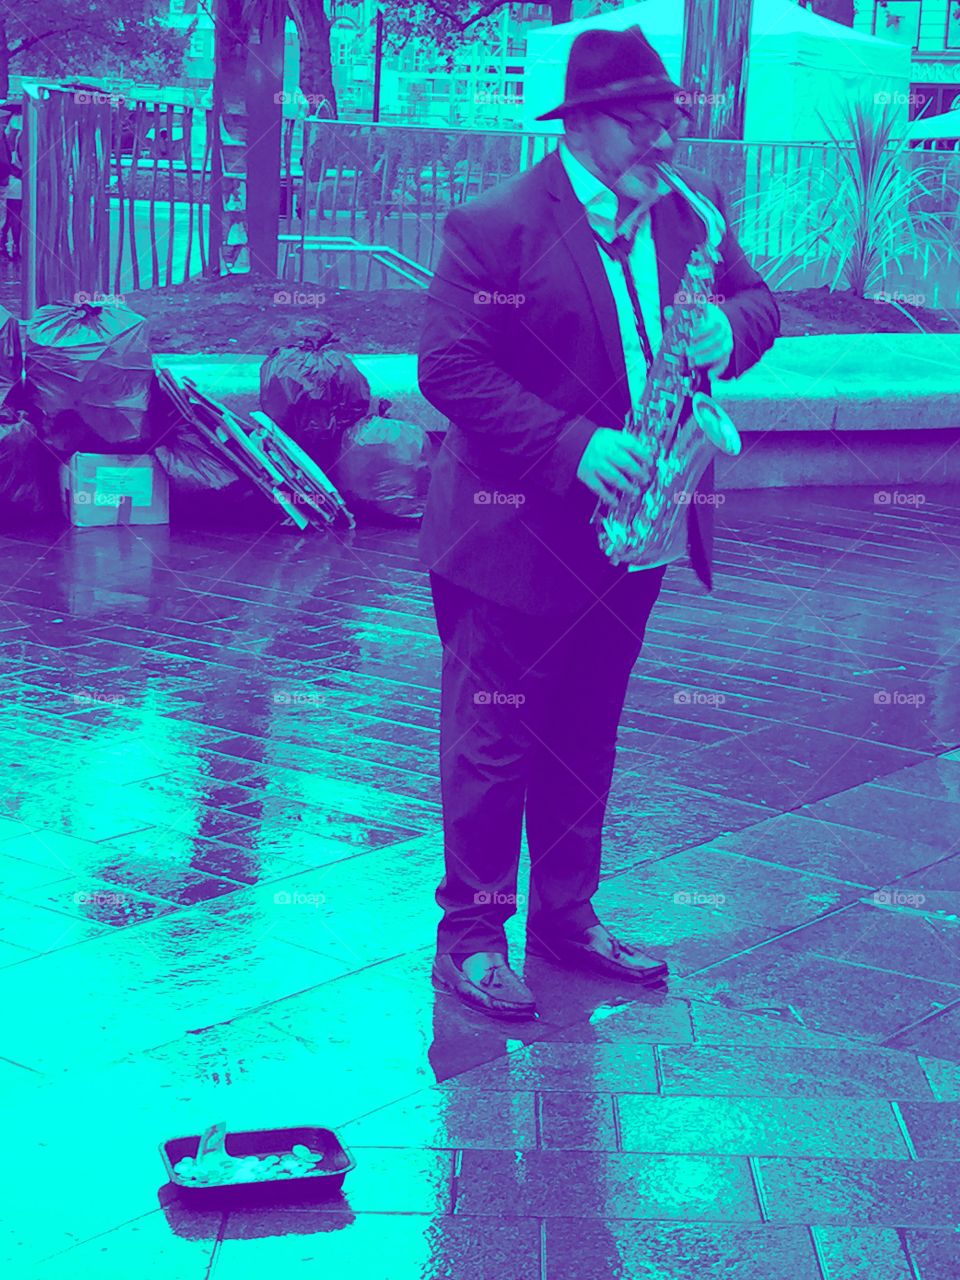 Saxophonist in Covent Garden, London